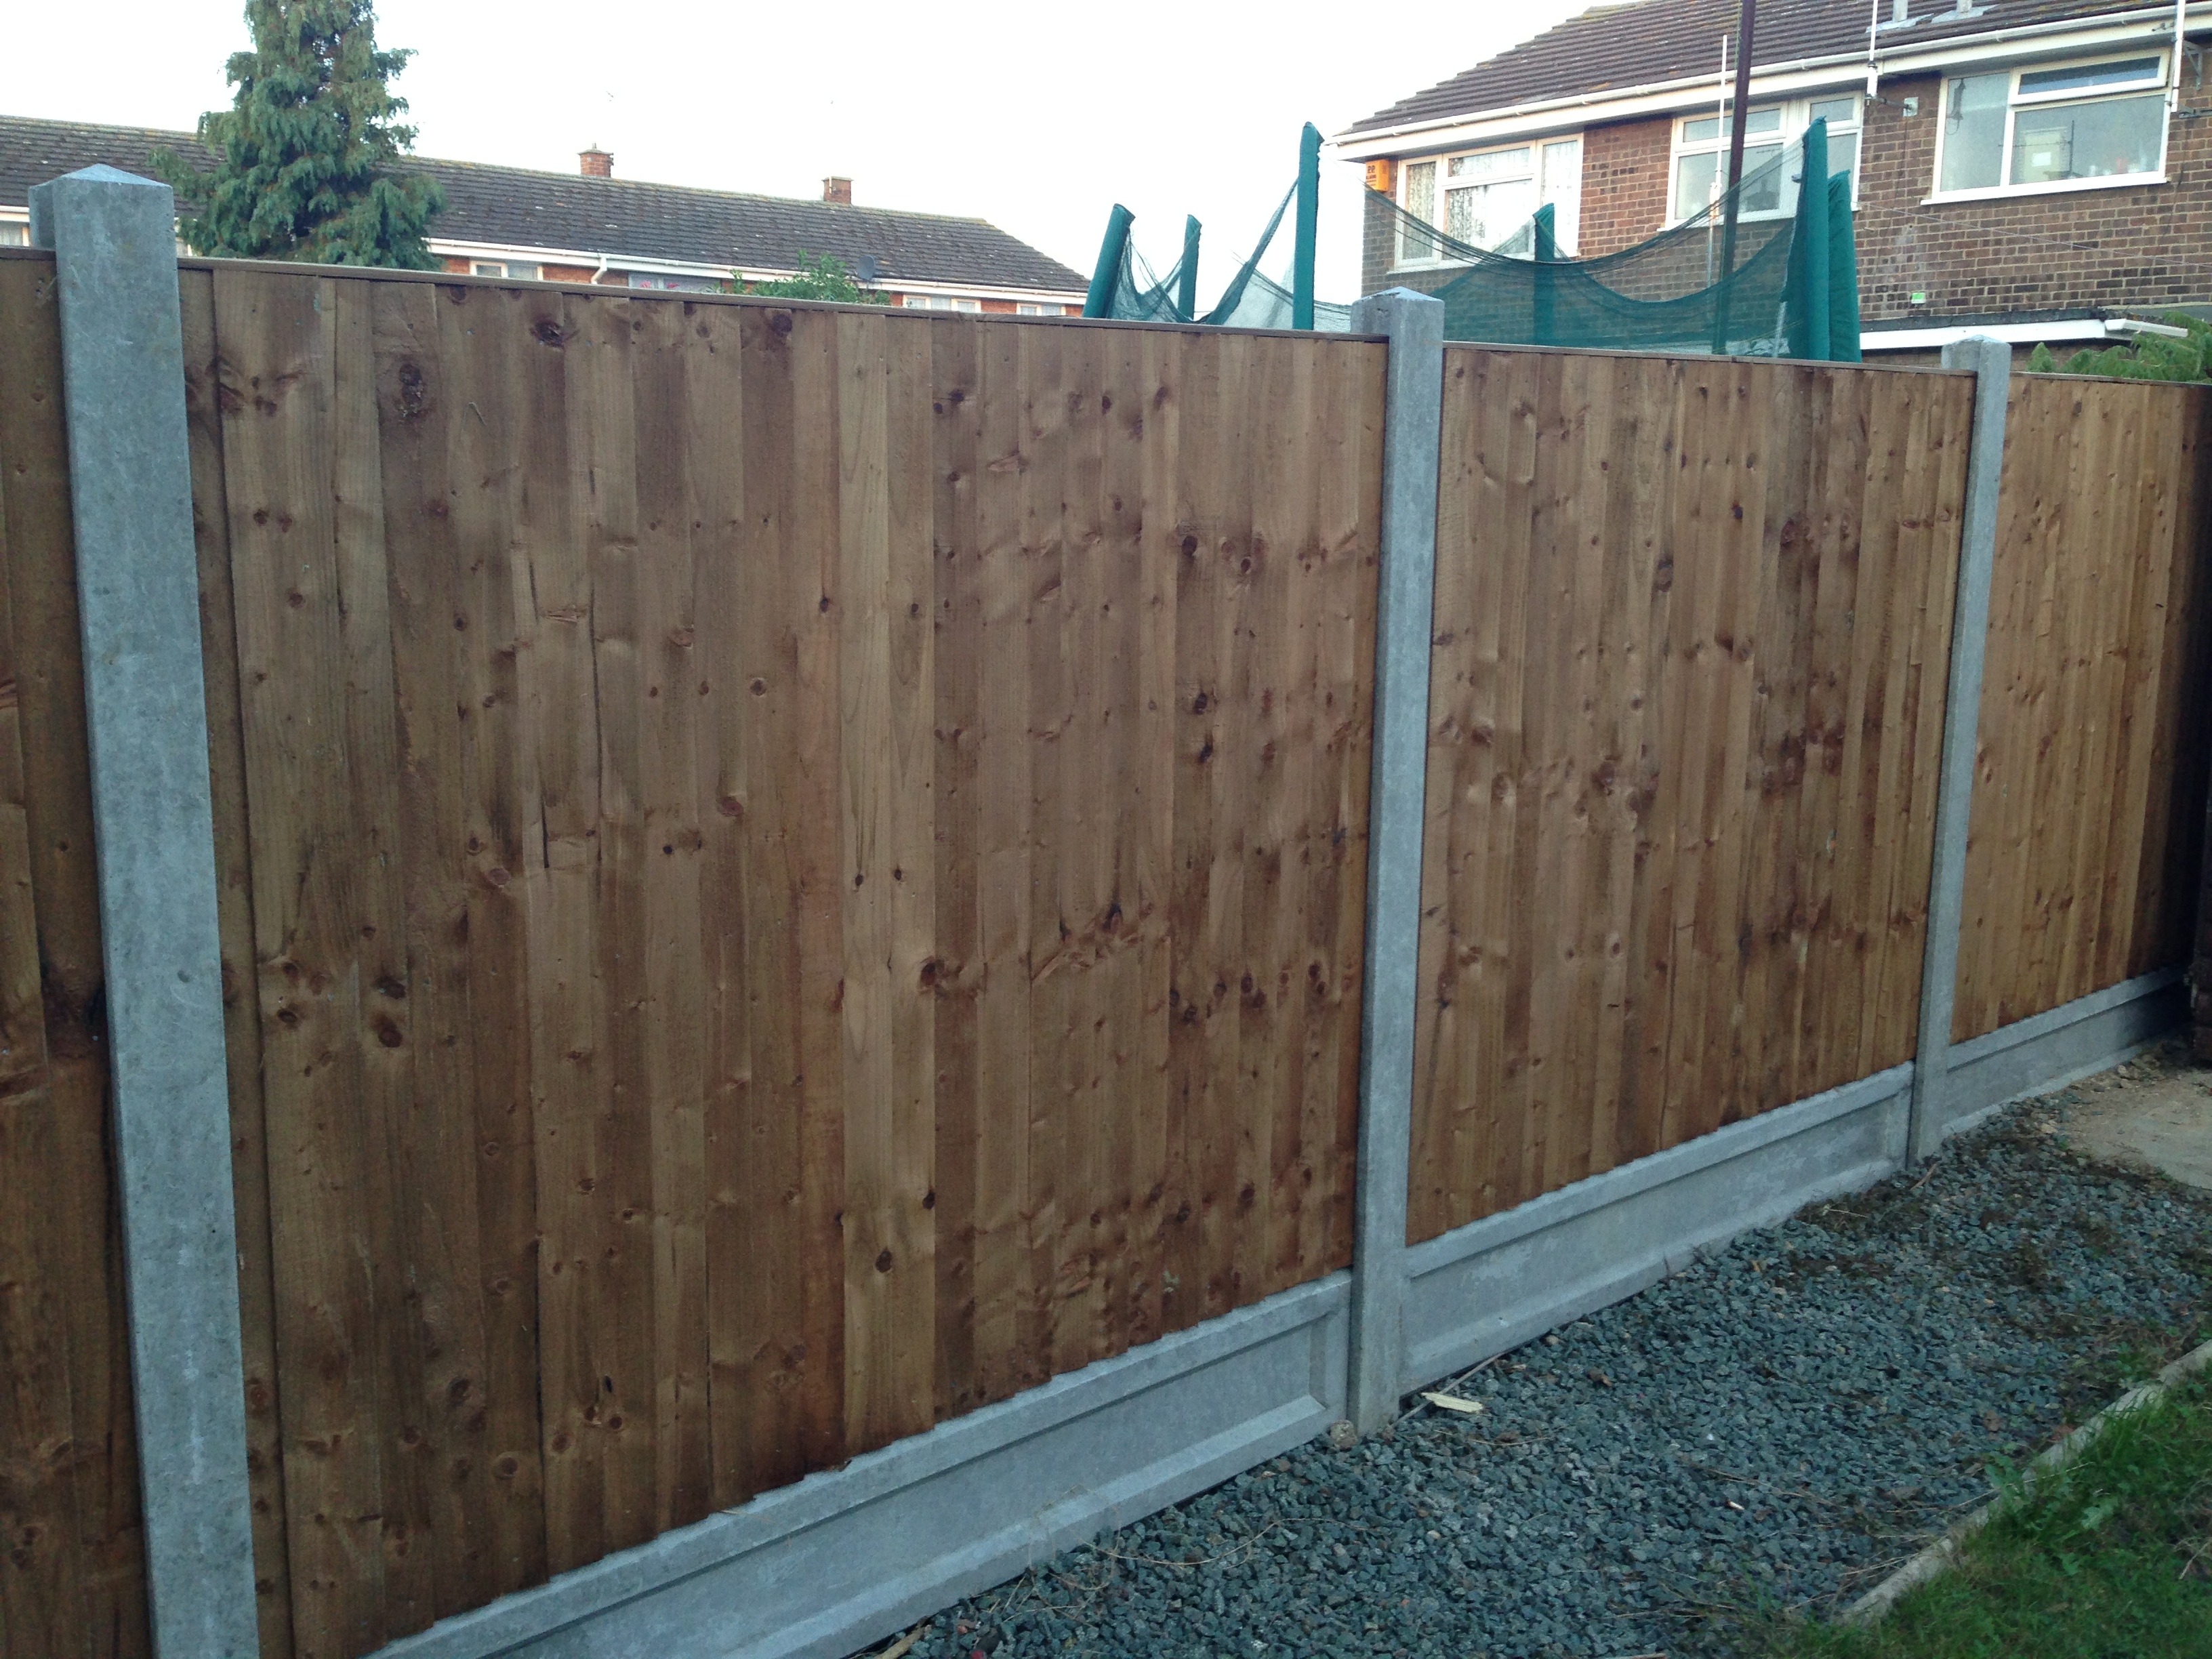 feather edged fencing with gravel boards and concrete posts